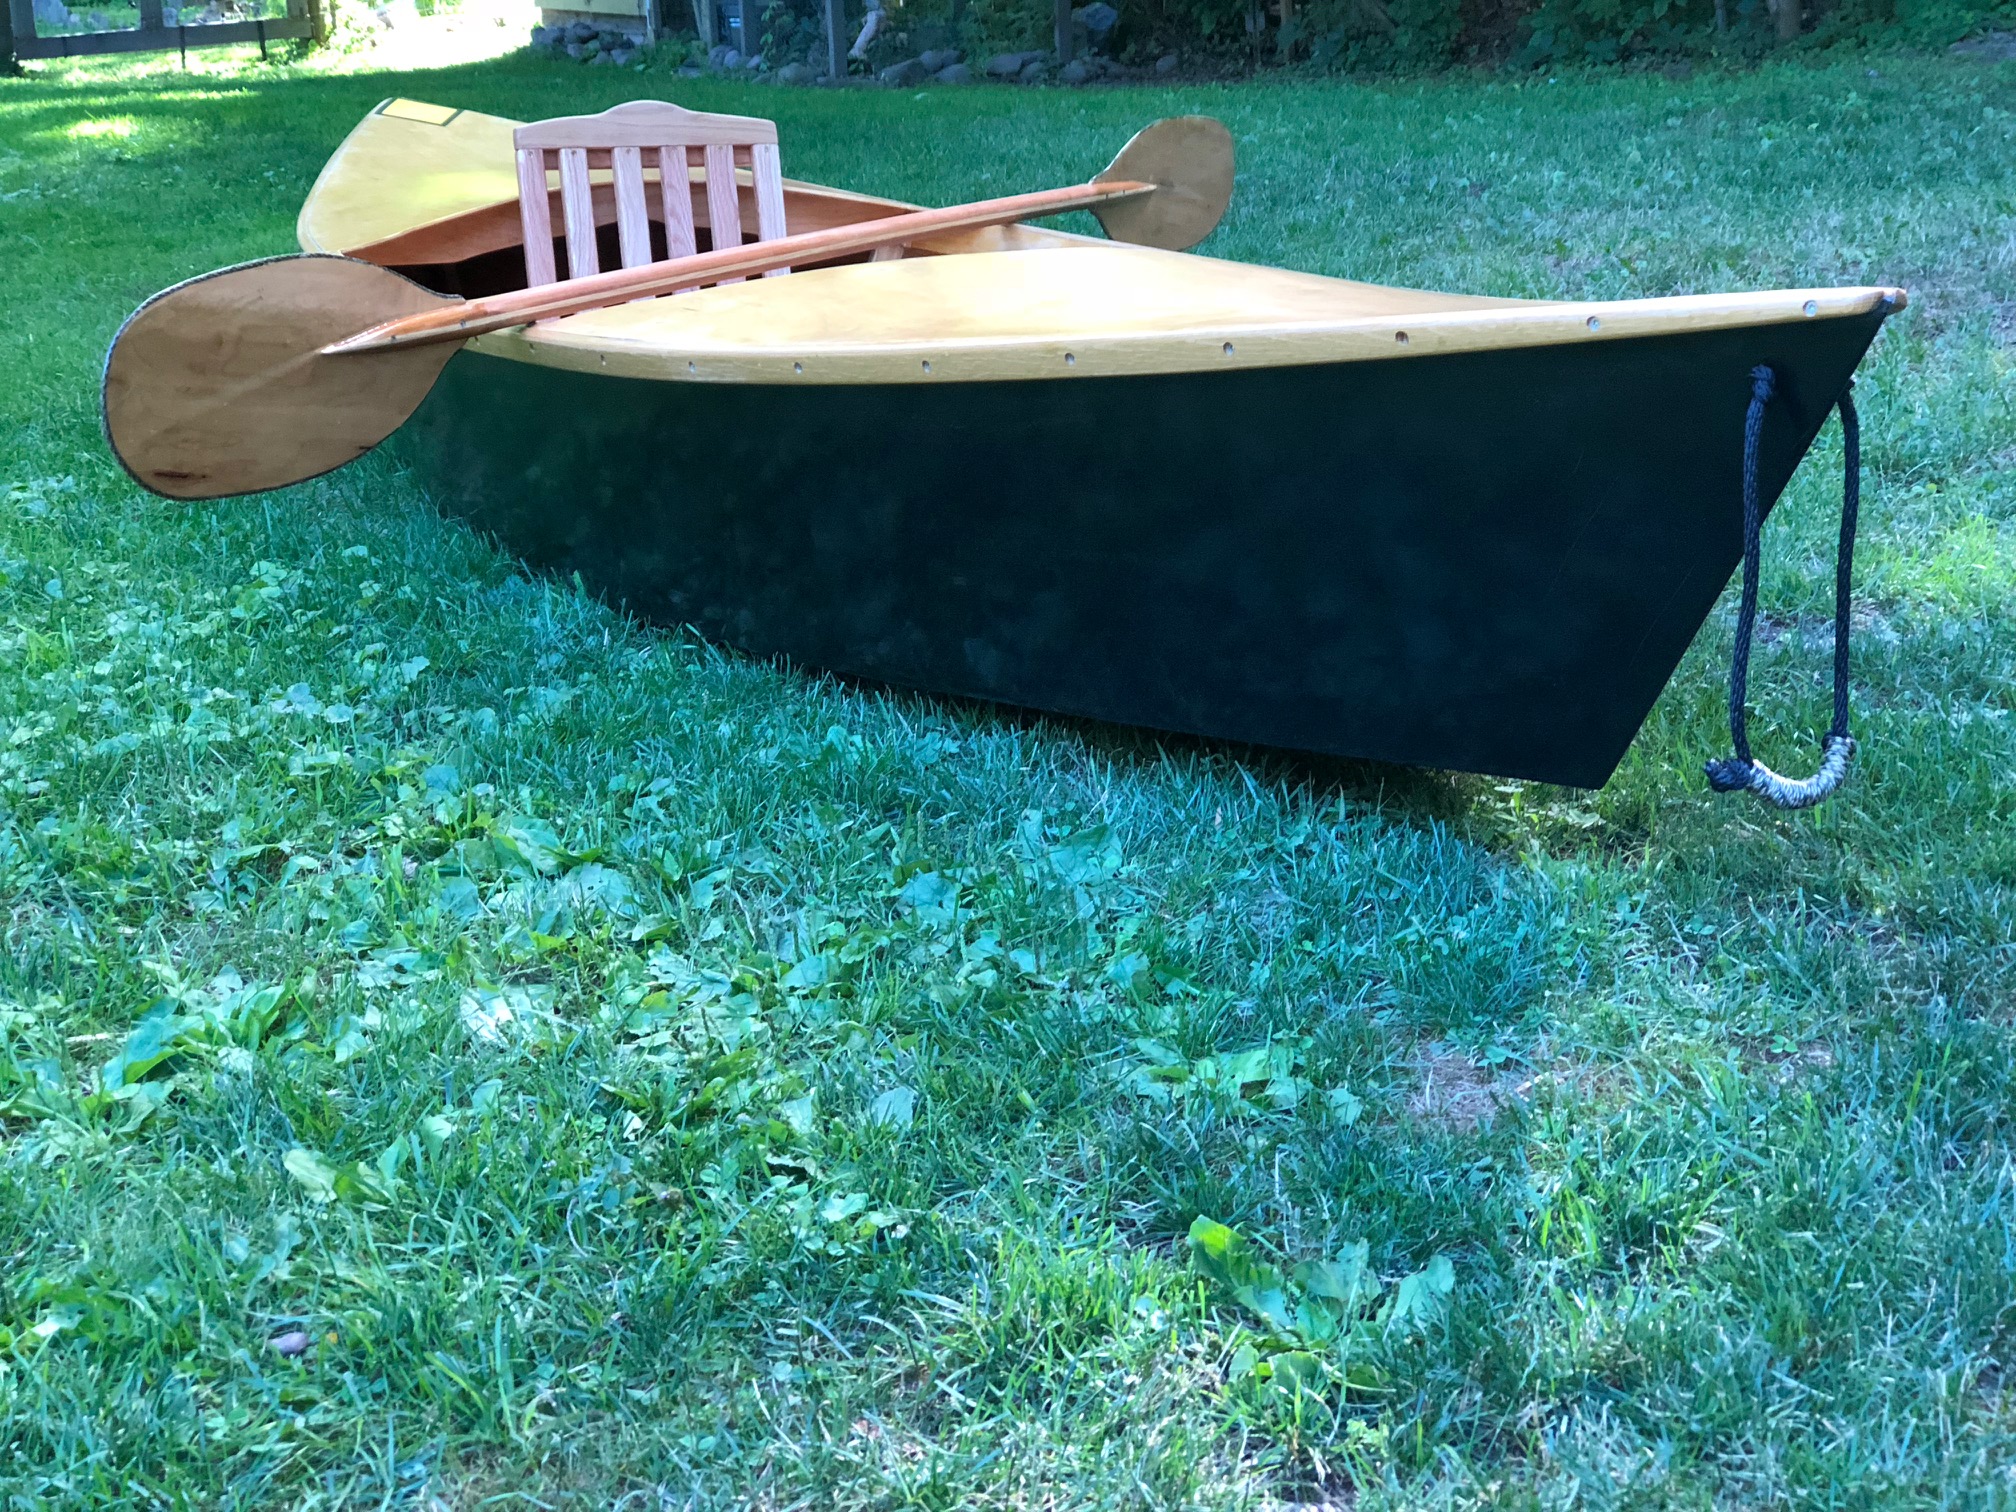 First Kayak built for the our project, Rembering the Fallen.